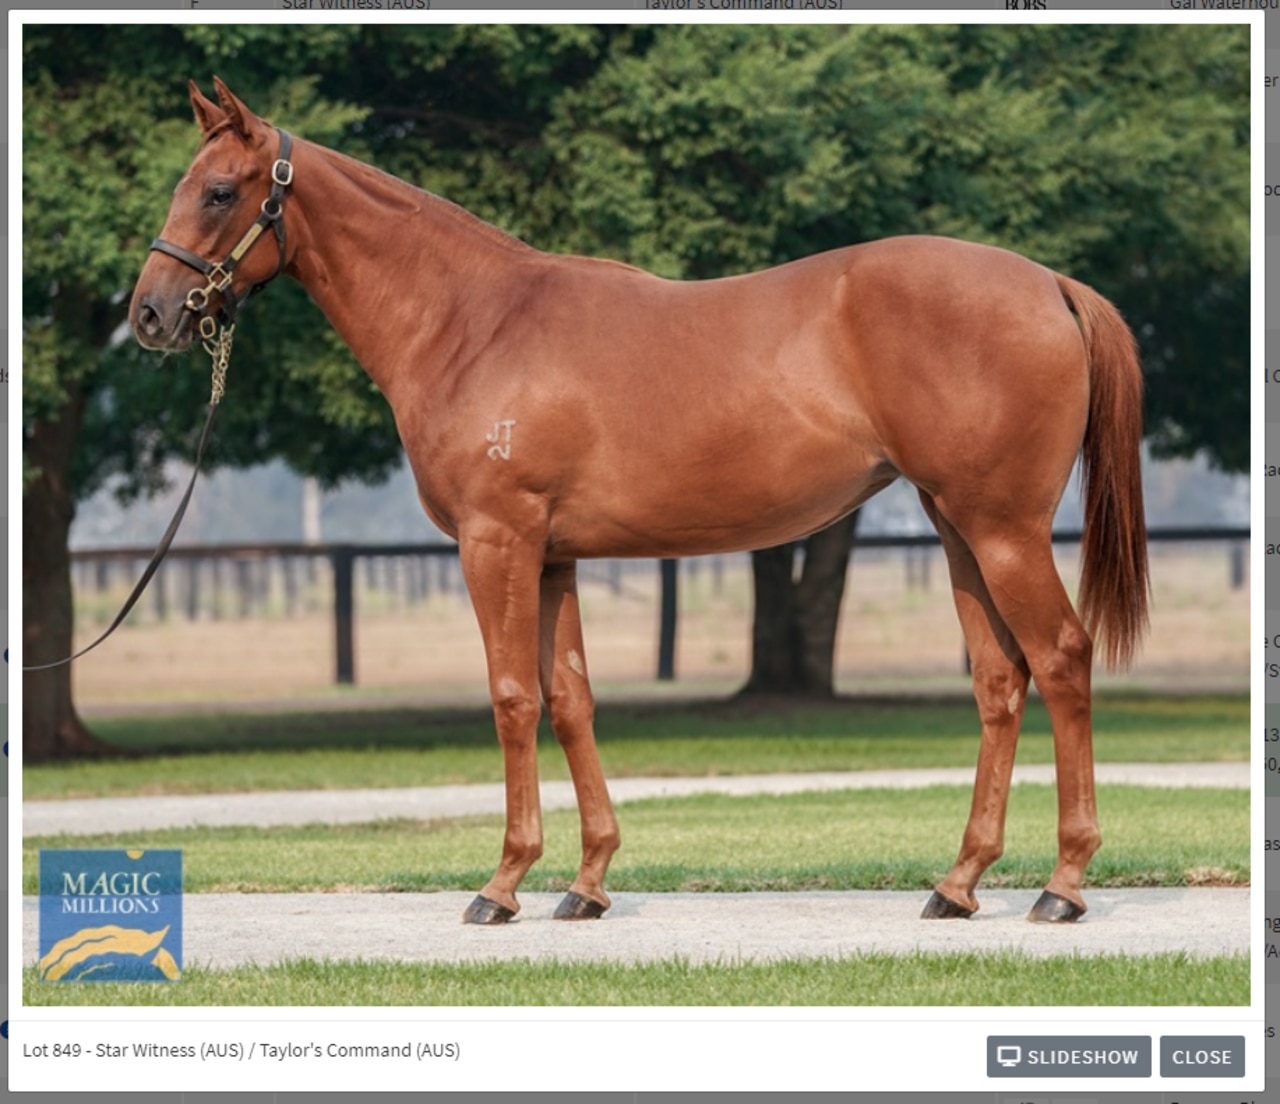 Magic millions yearling photo of Star Witness filly out of taylors command